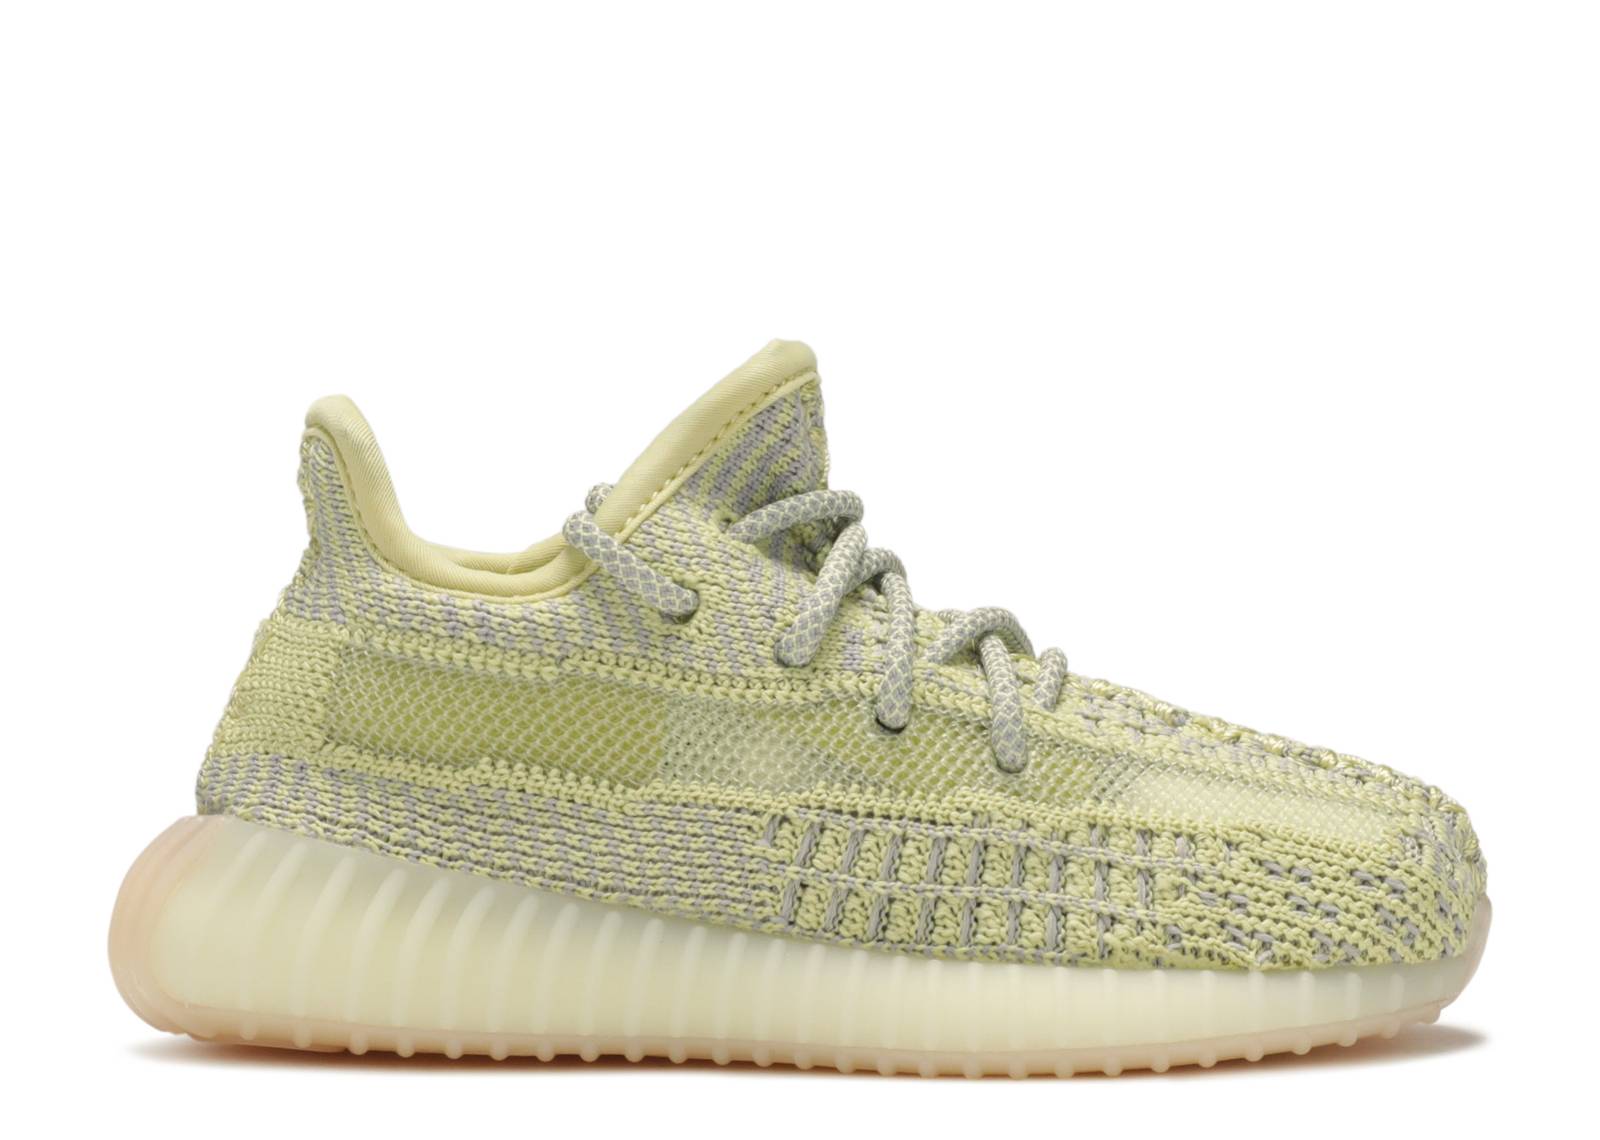 Yeezy Boost 350 V2 Infant 'Antlia Non-Reflective'Color:Yellow,Size:0